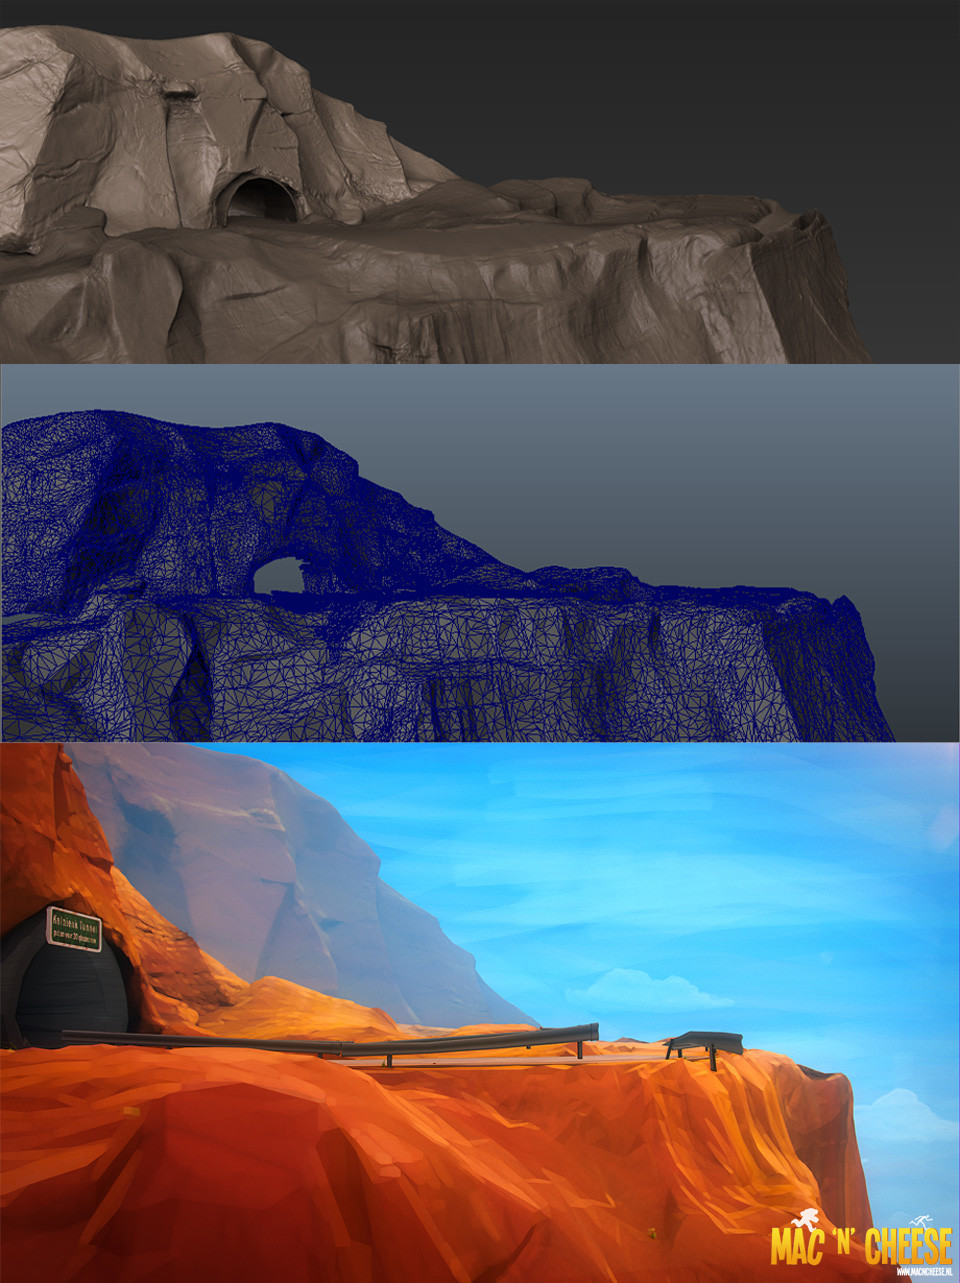 I did all the environmental work, mostly in Zbrush